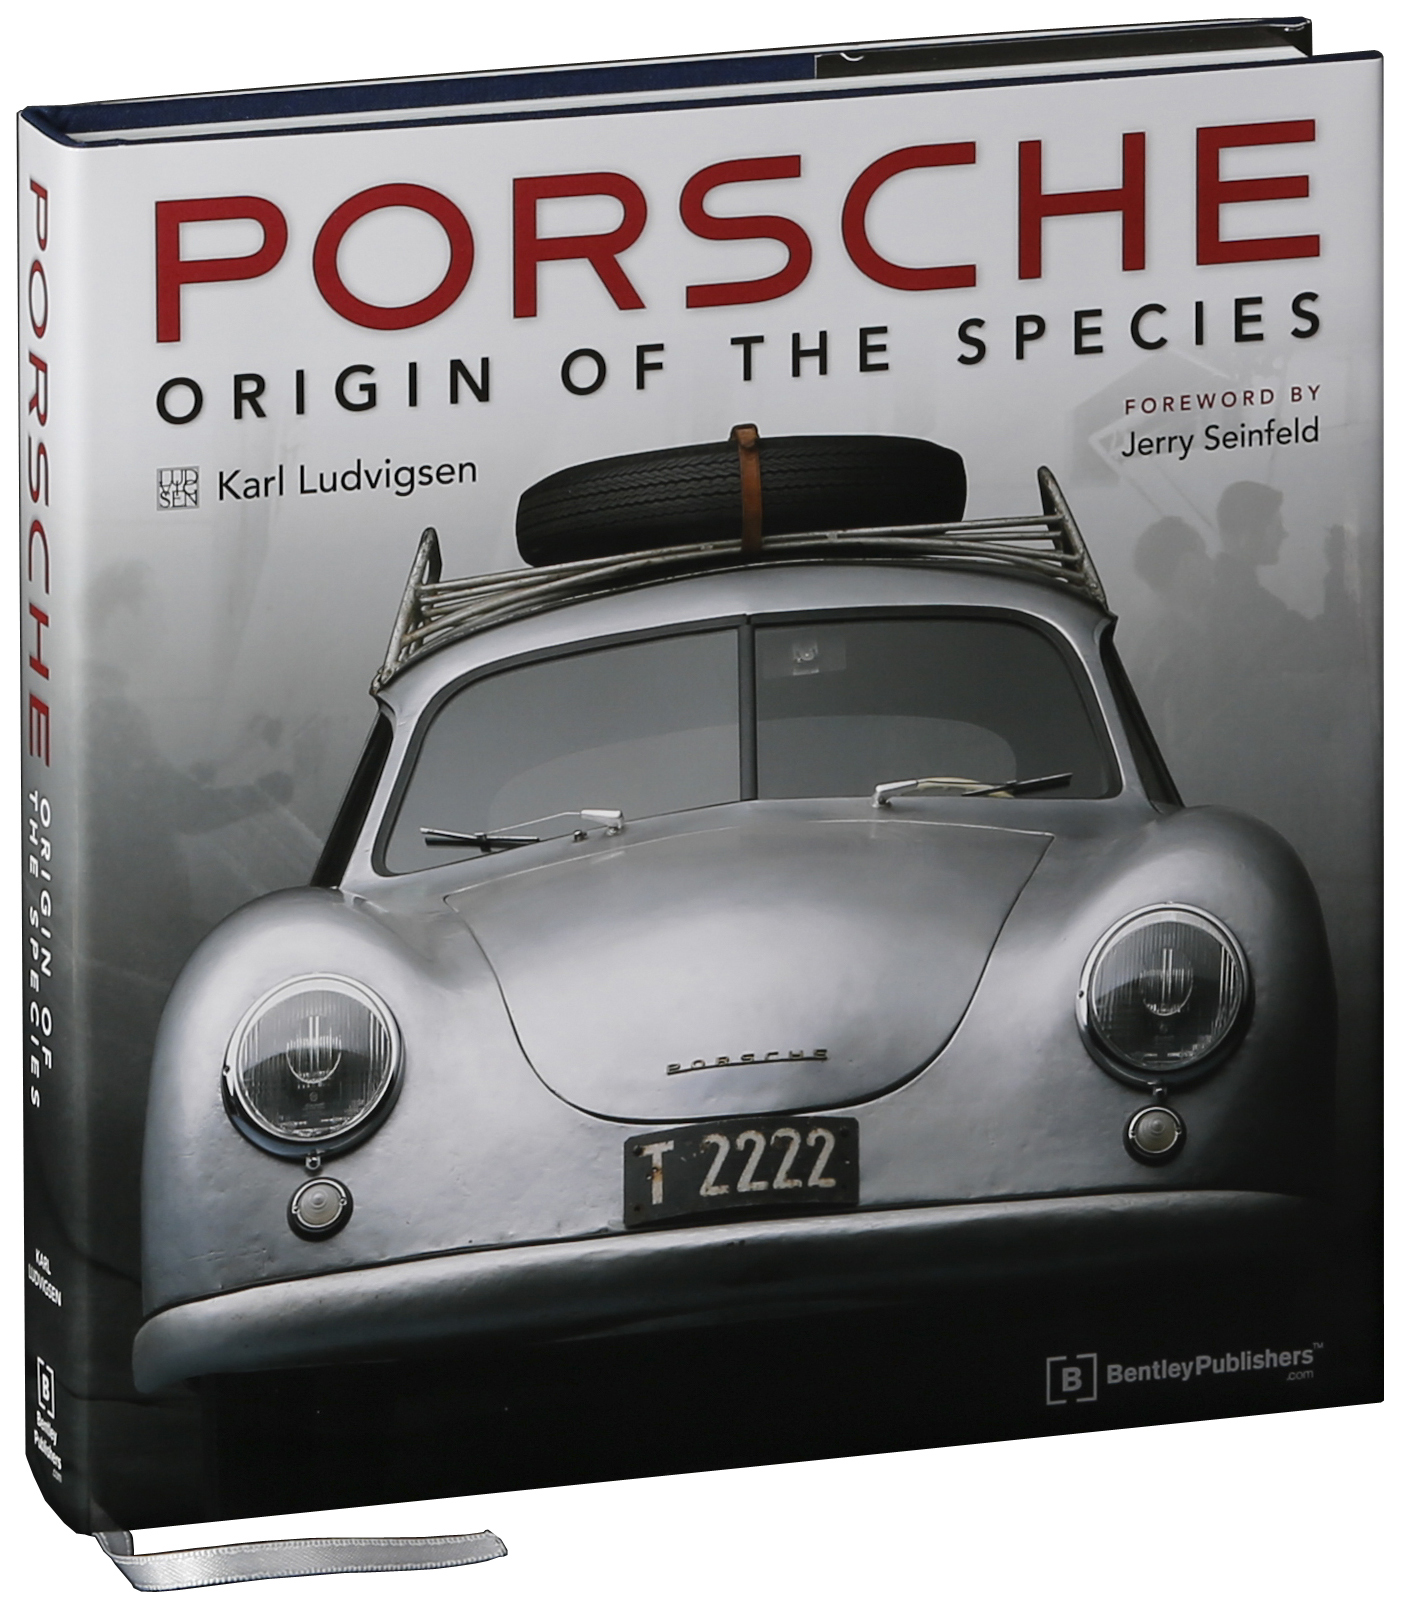 “Porsche: Origin of the Species” May Just Be Your Perfect Gift